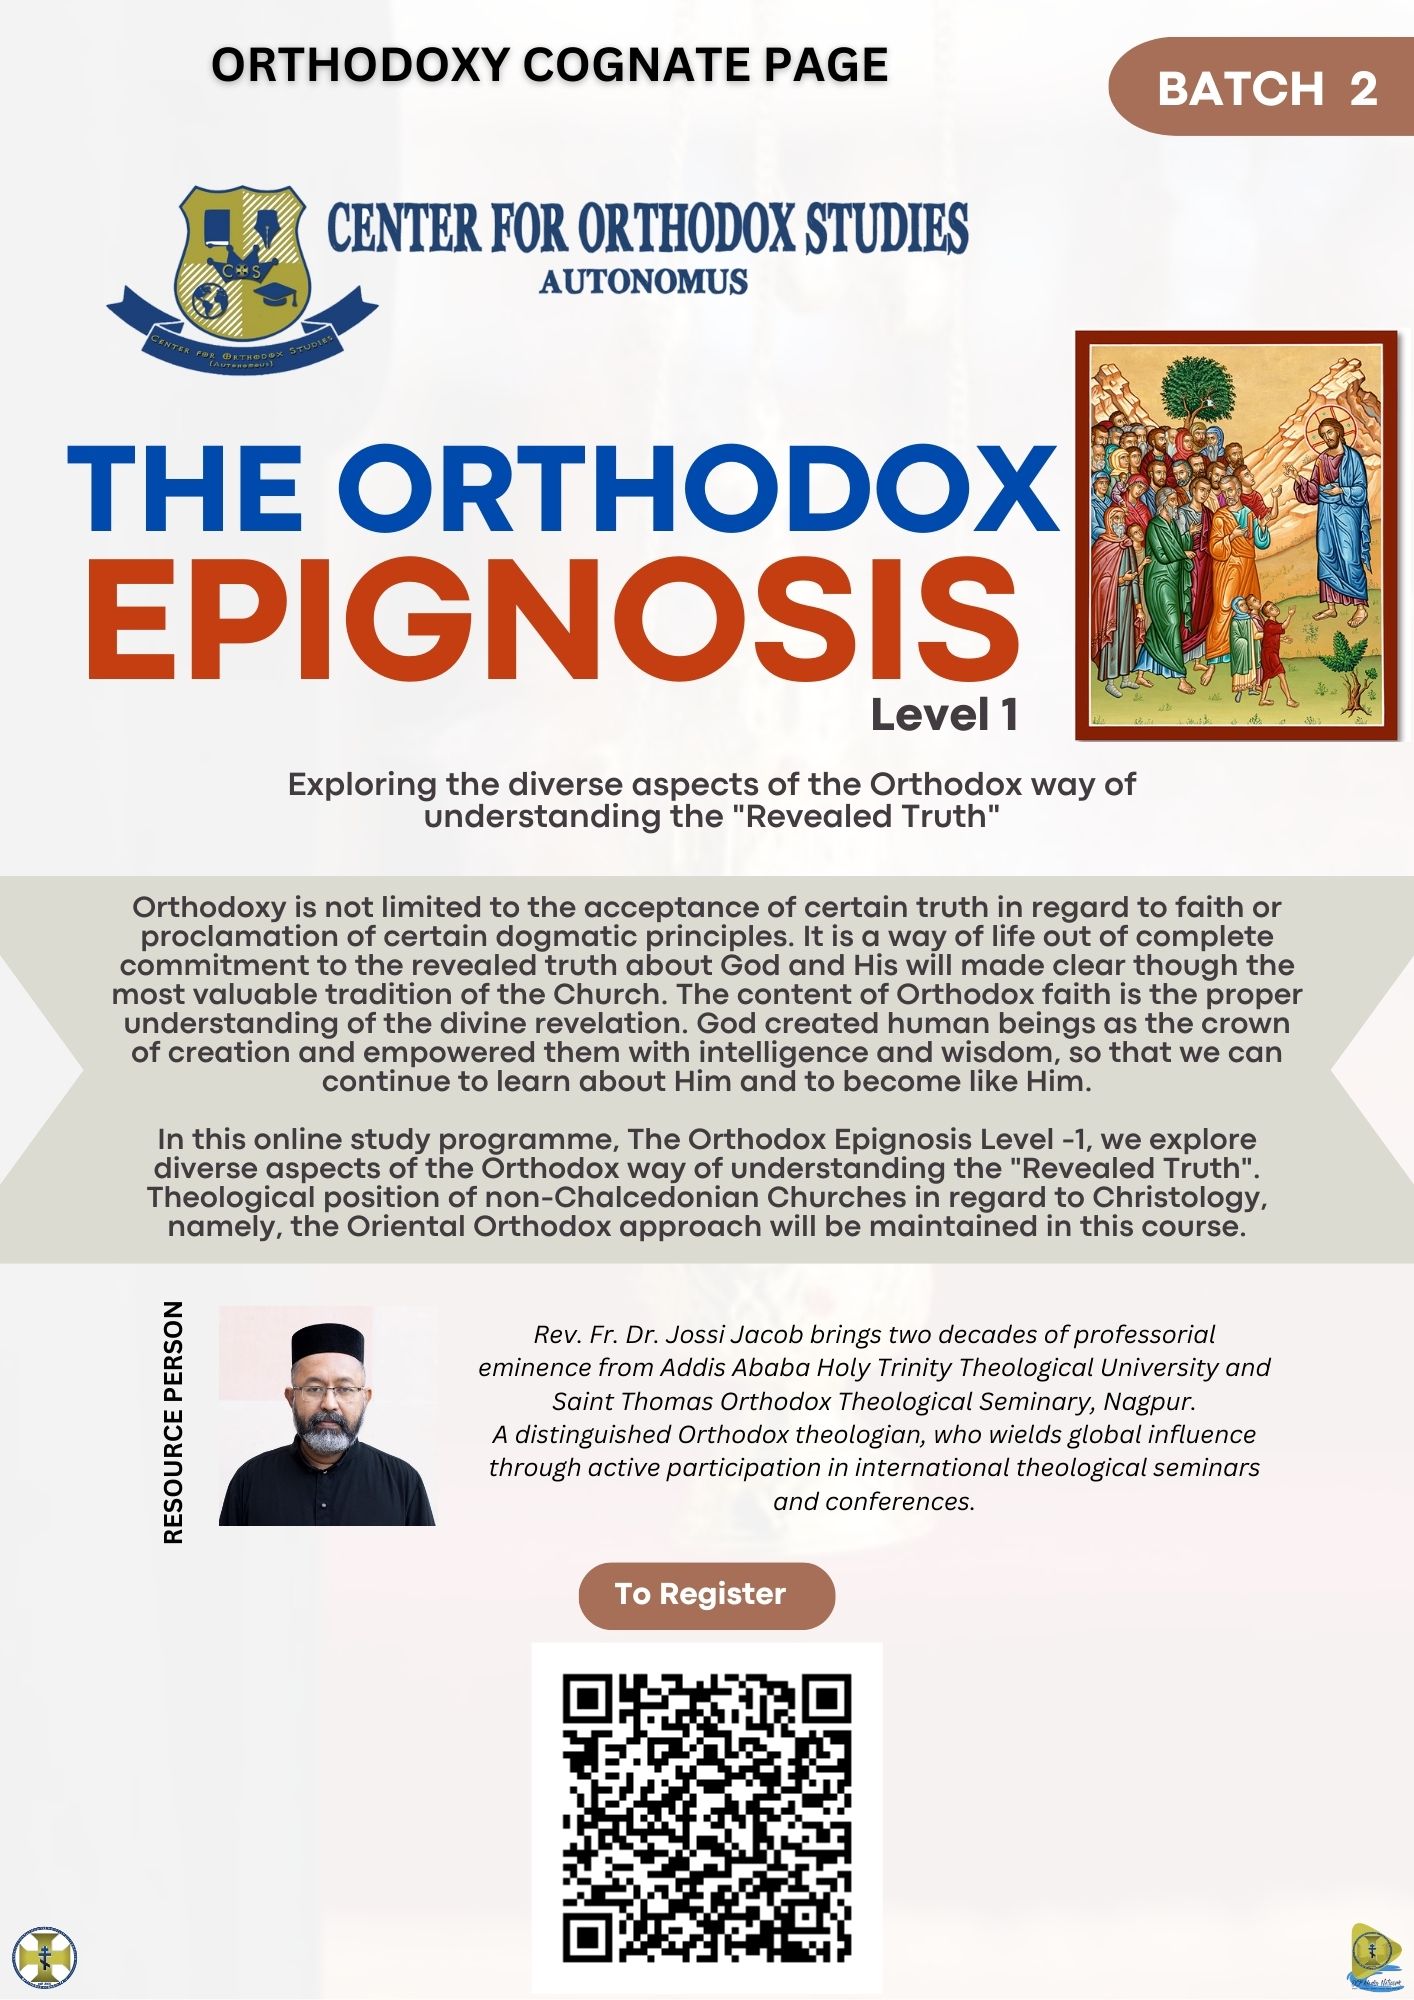 COS Launches Second Batch of ‘The Orthodox Epignosis’ Online Certificate Program